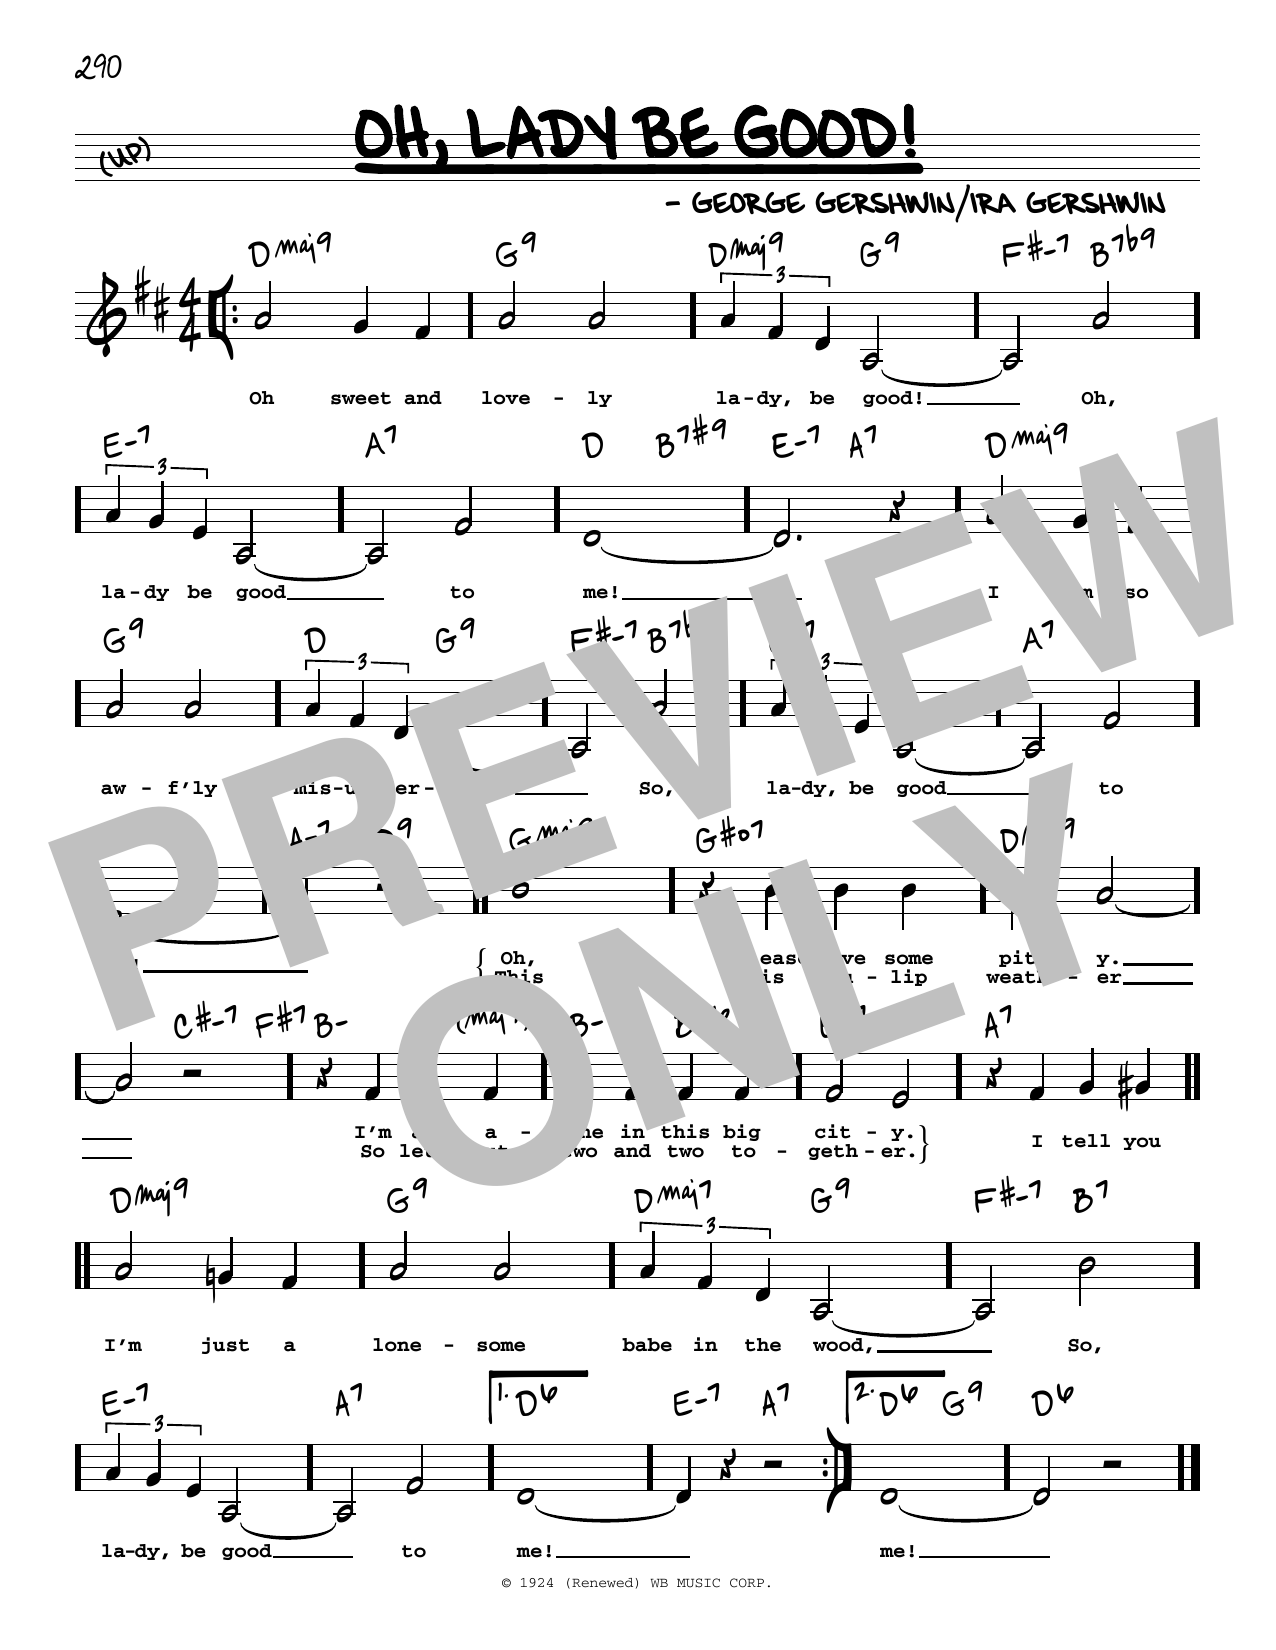 Download George Gershwin Oh, Lady Be Good! (Low Voice) Sheet Music